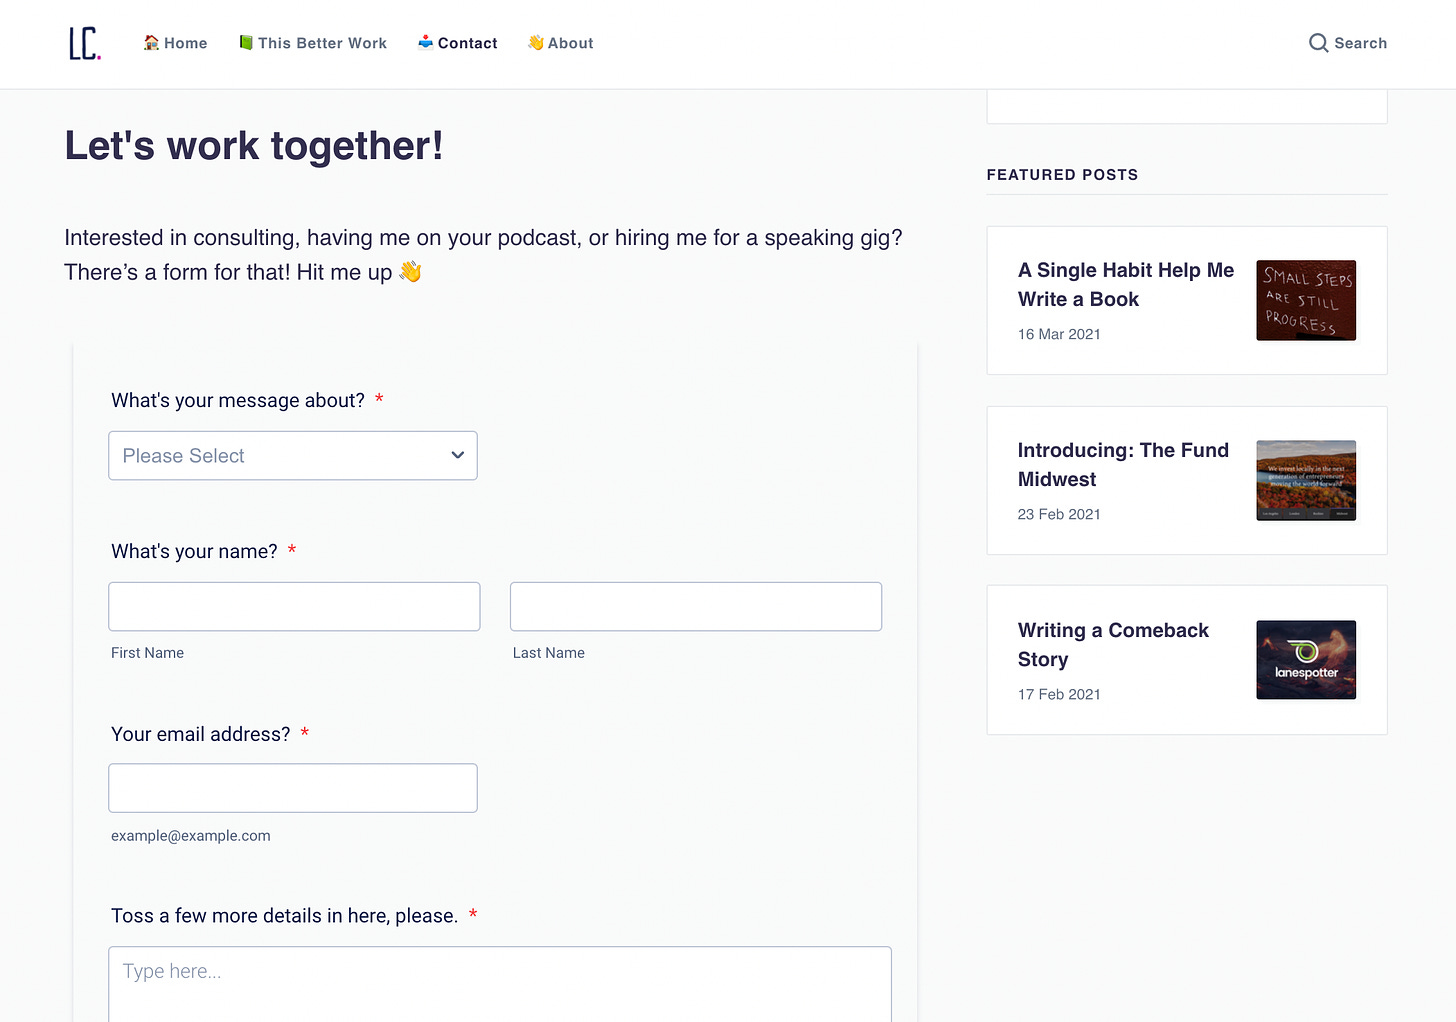 How To Create a Simple Workflow to Automate Your Website Contact Form